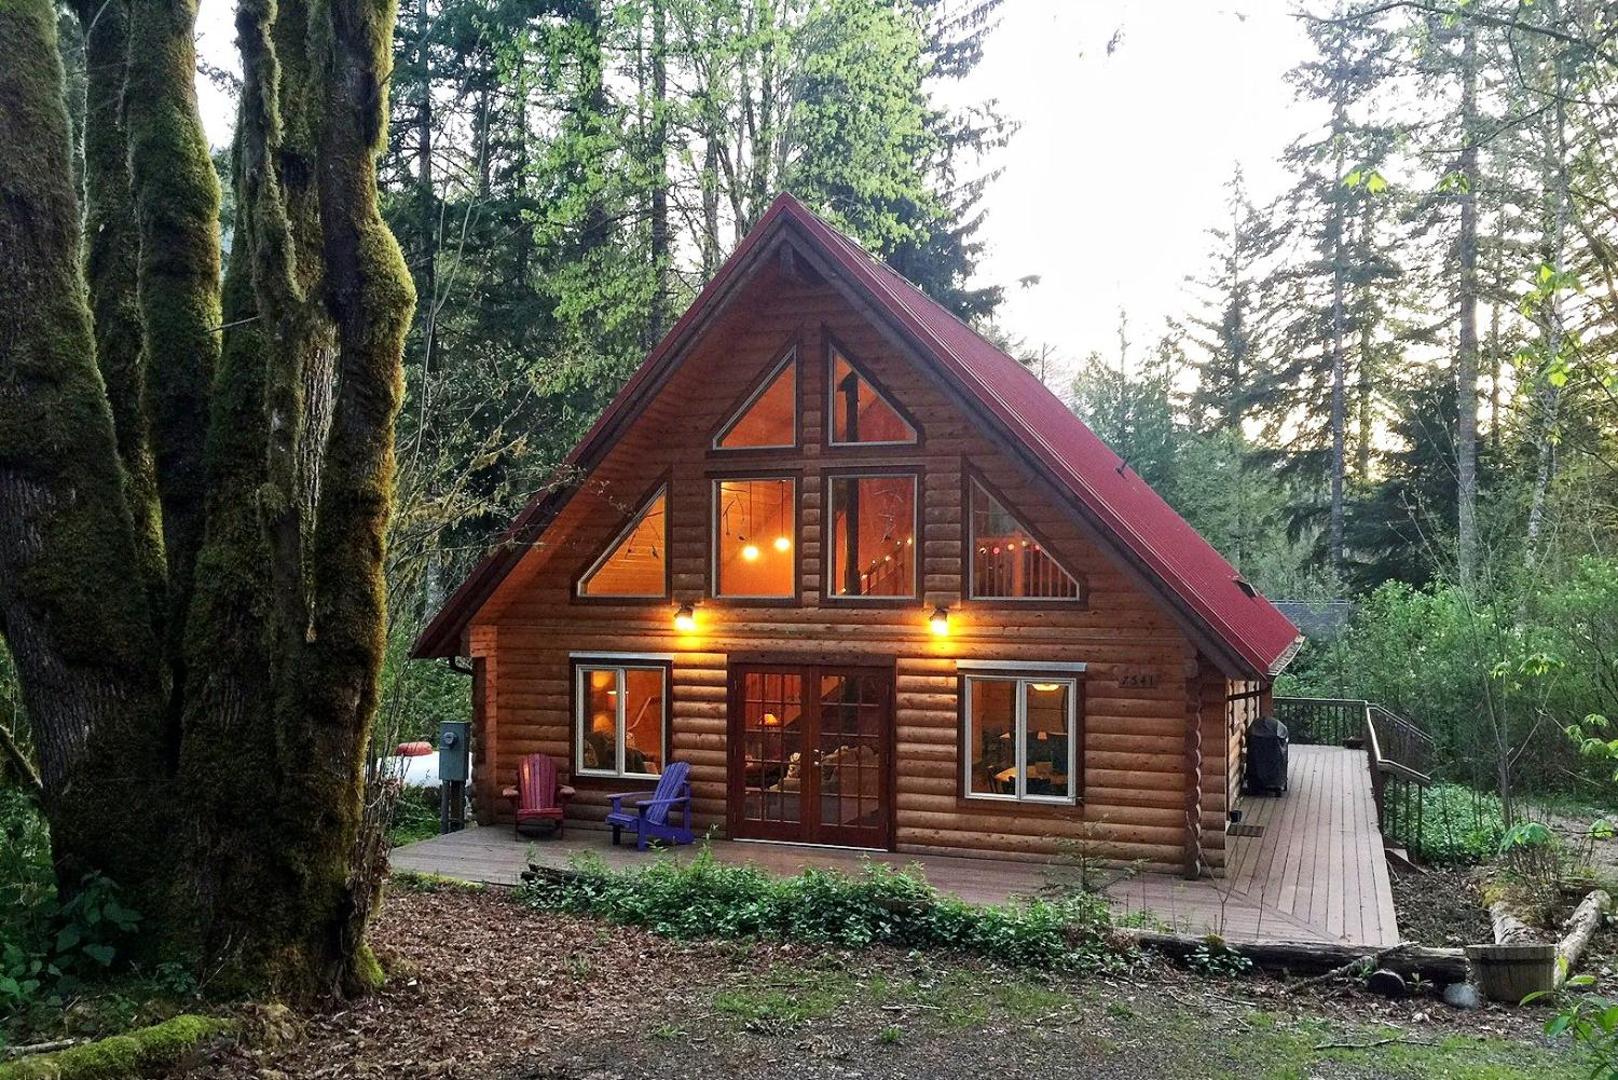 Glacier Springs Cabin #21 – This family home says Cabin in the Country!